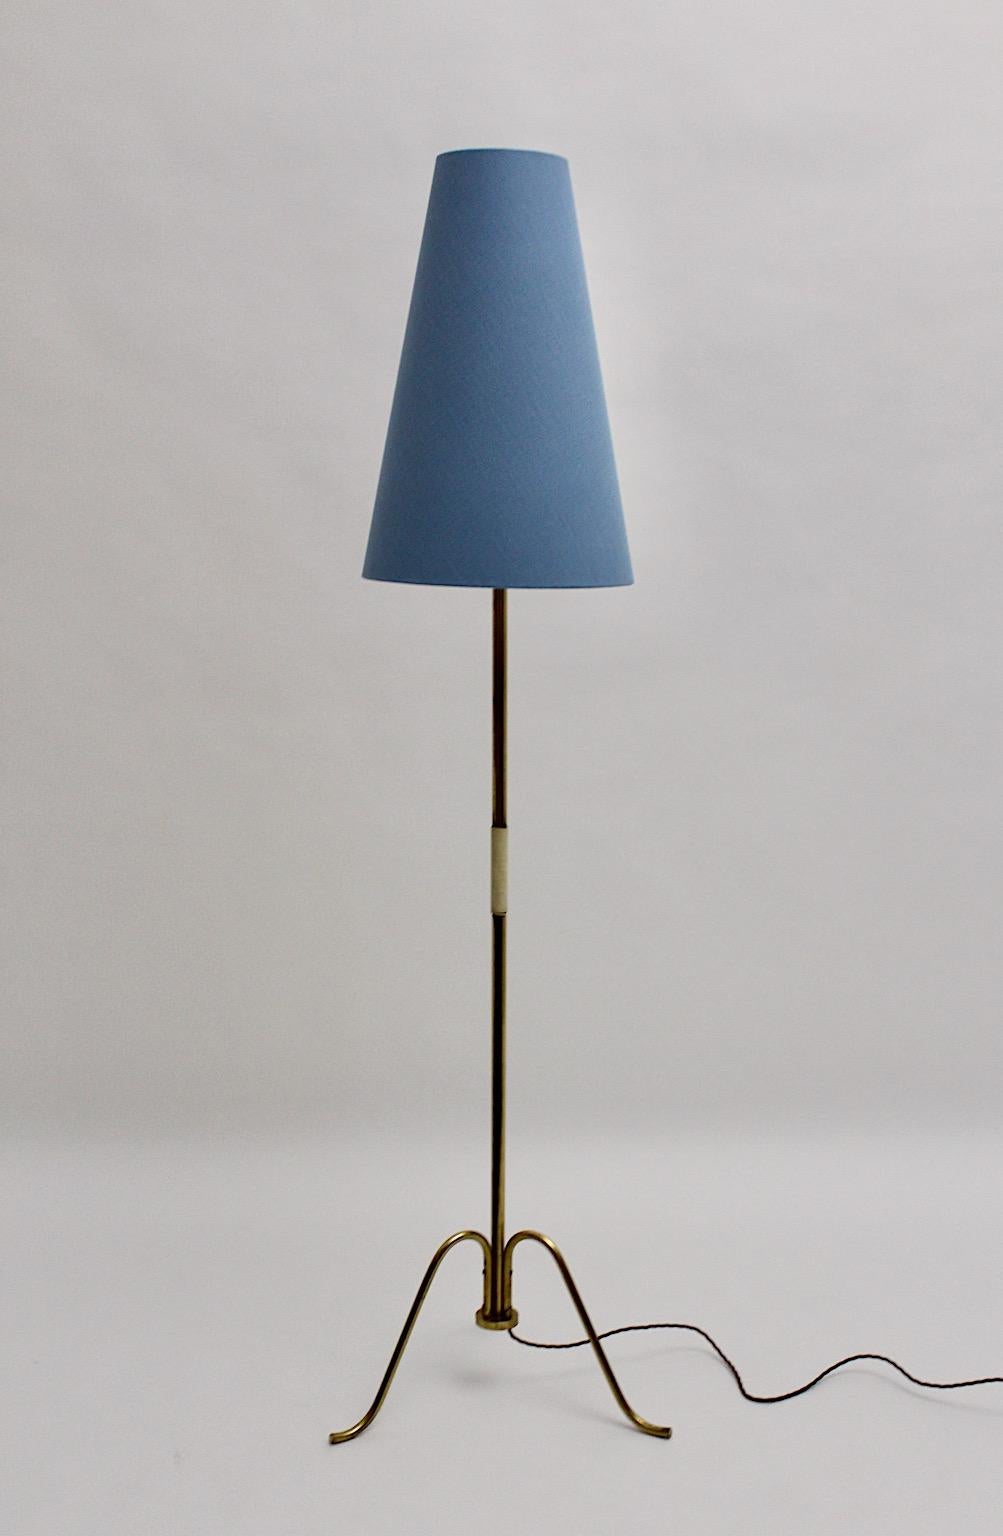 Mid-Century Modern vintage floor lamp from brass tube designed and manufactured in Vienna, Austria, 1950s.
While the brass tube stem is partly wrapped with white plastic string as handle, the conical shaped renewed lamp shade is covered with